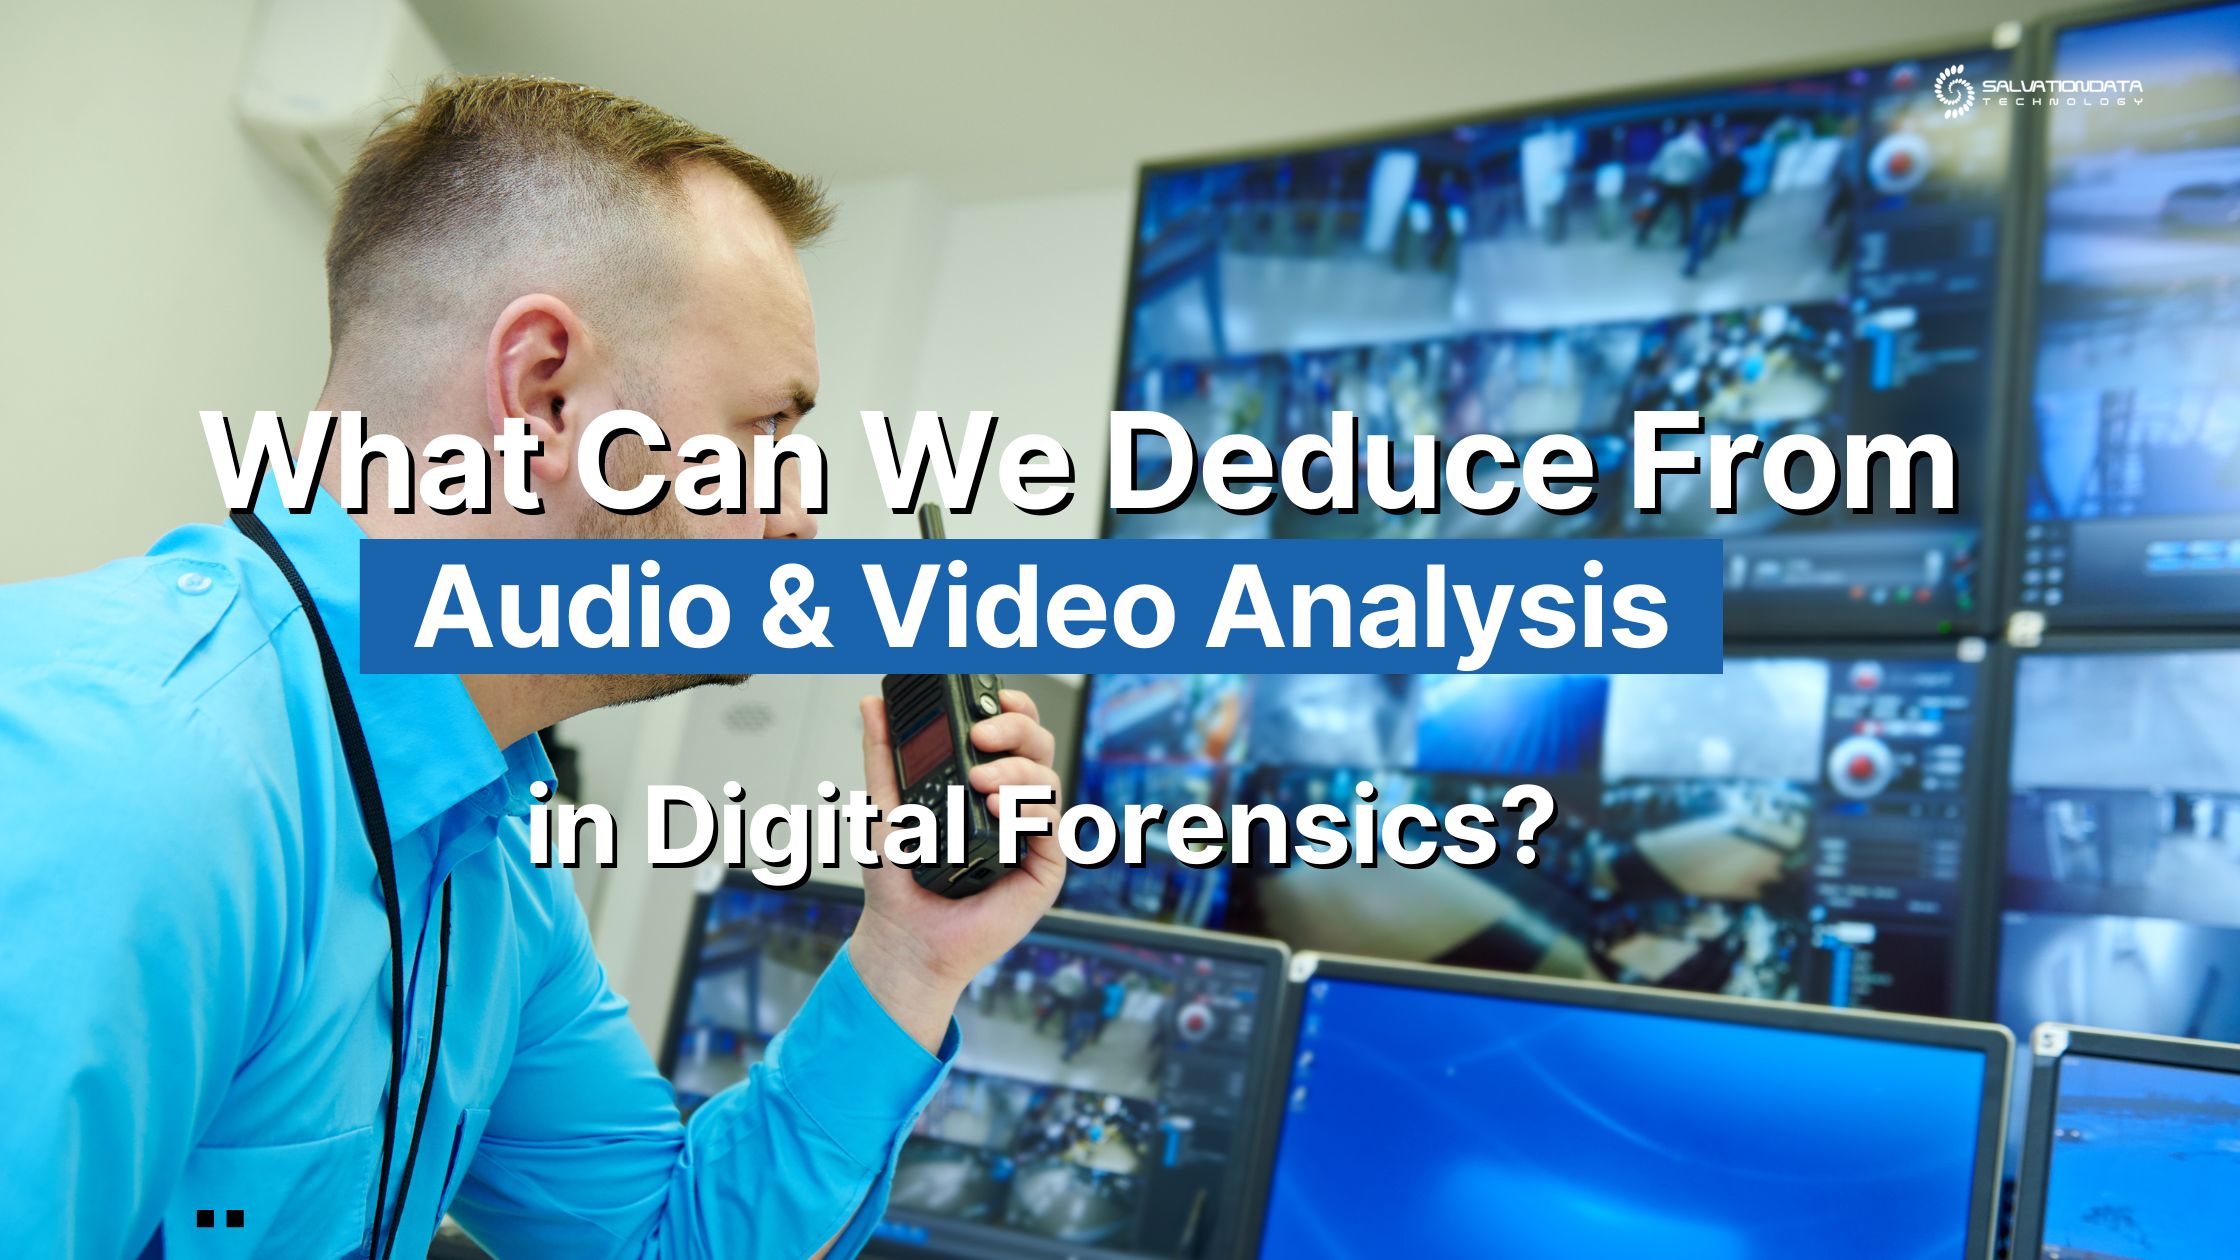 What Can We Deduce From Audio & Video Forensics?